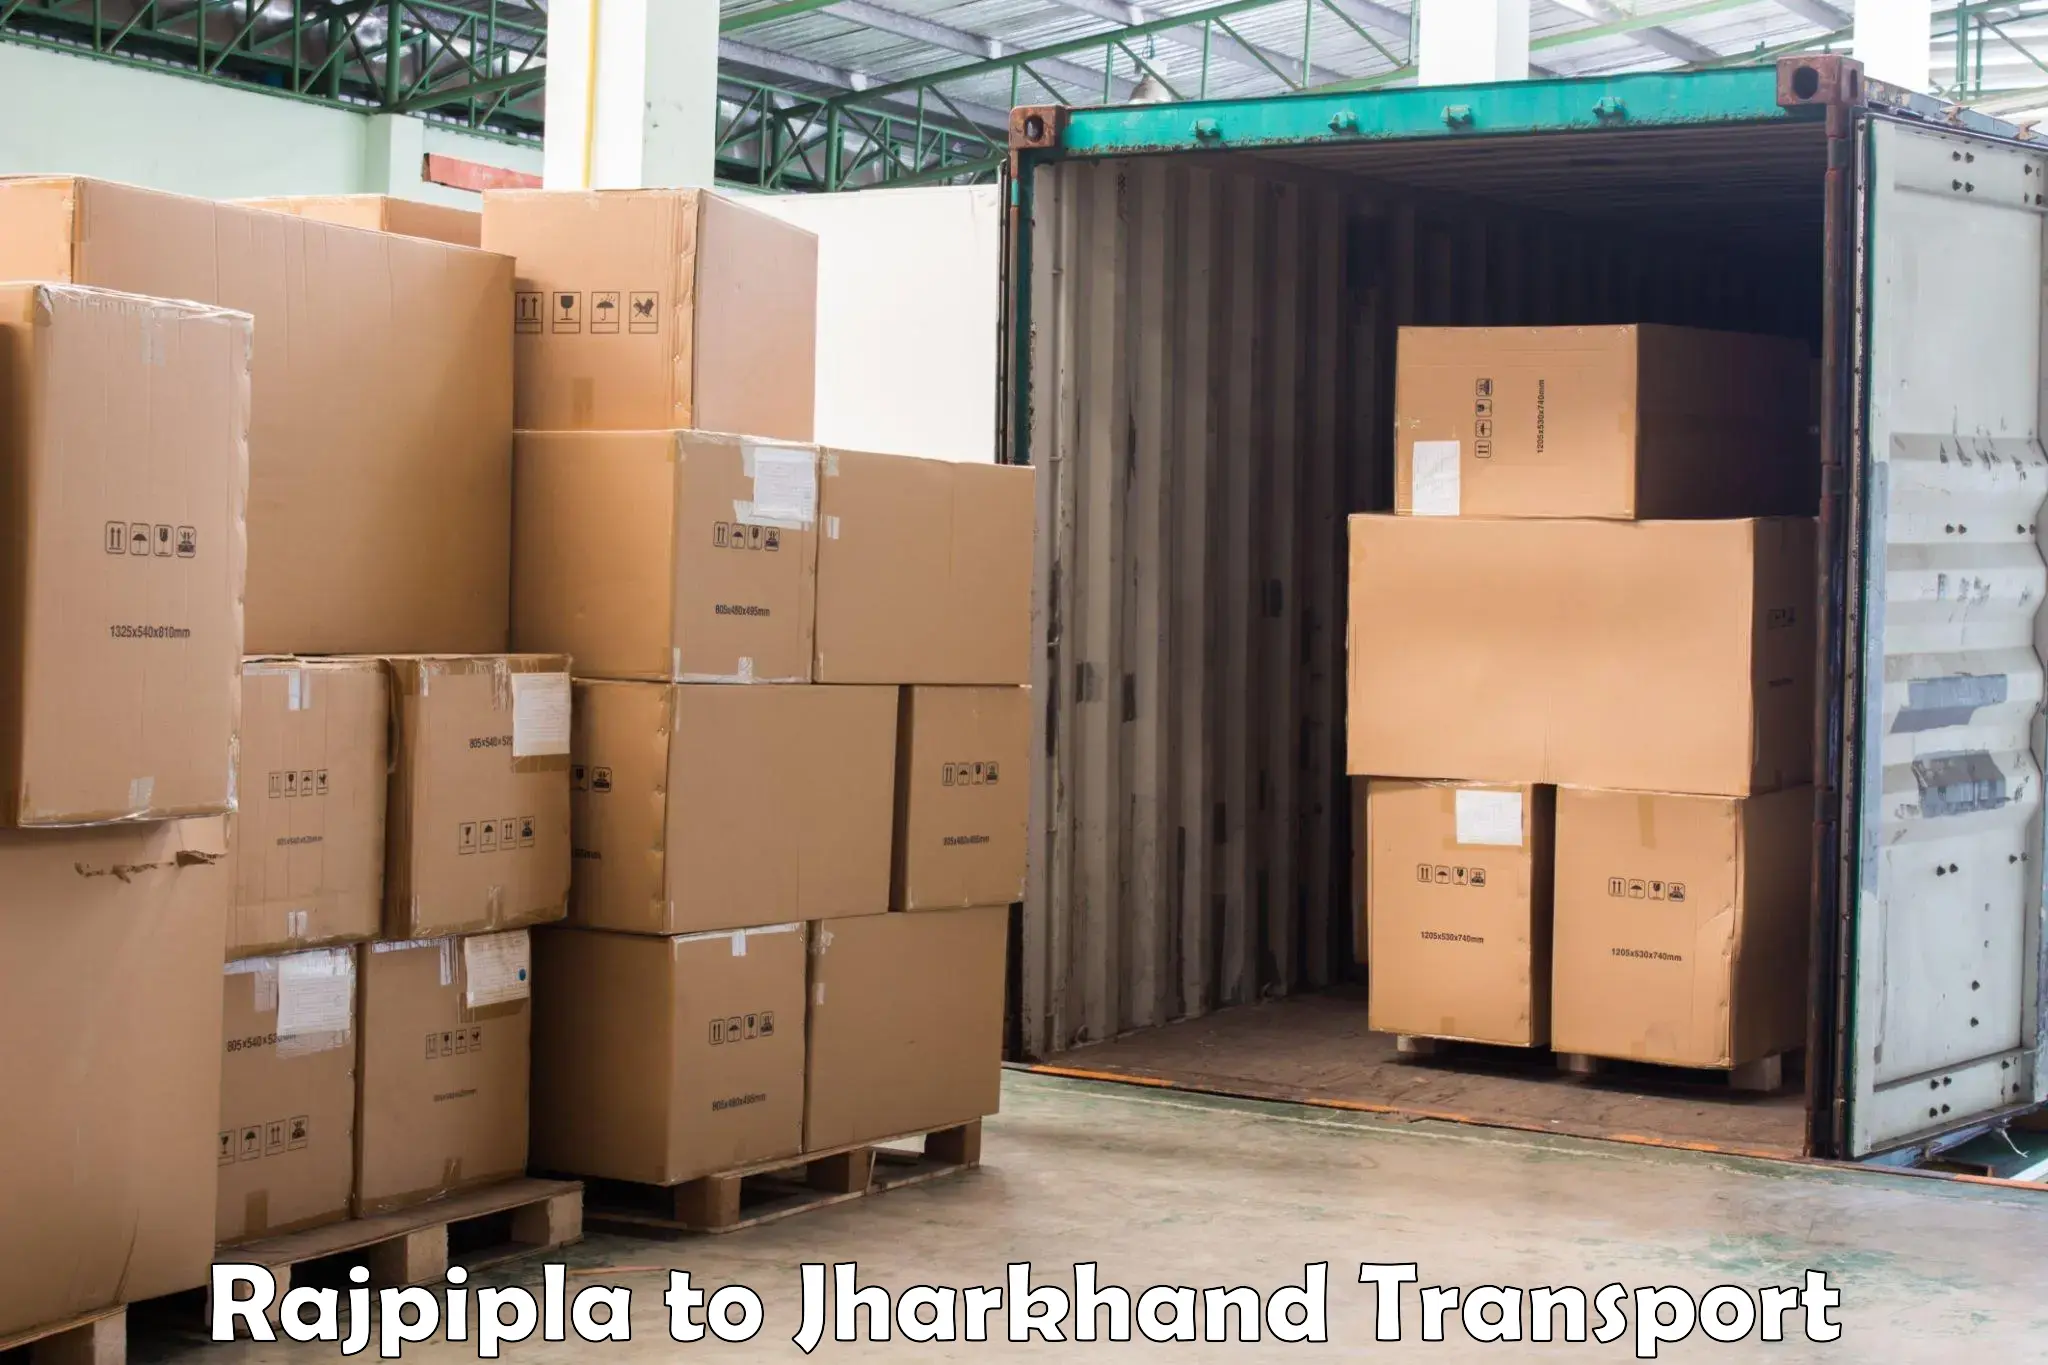 Air cargo transport services Rajpipla to Jamshedpur